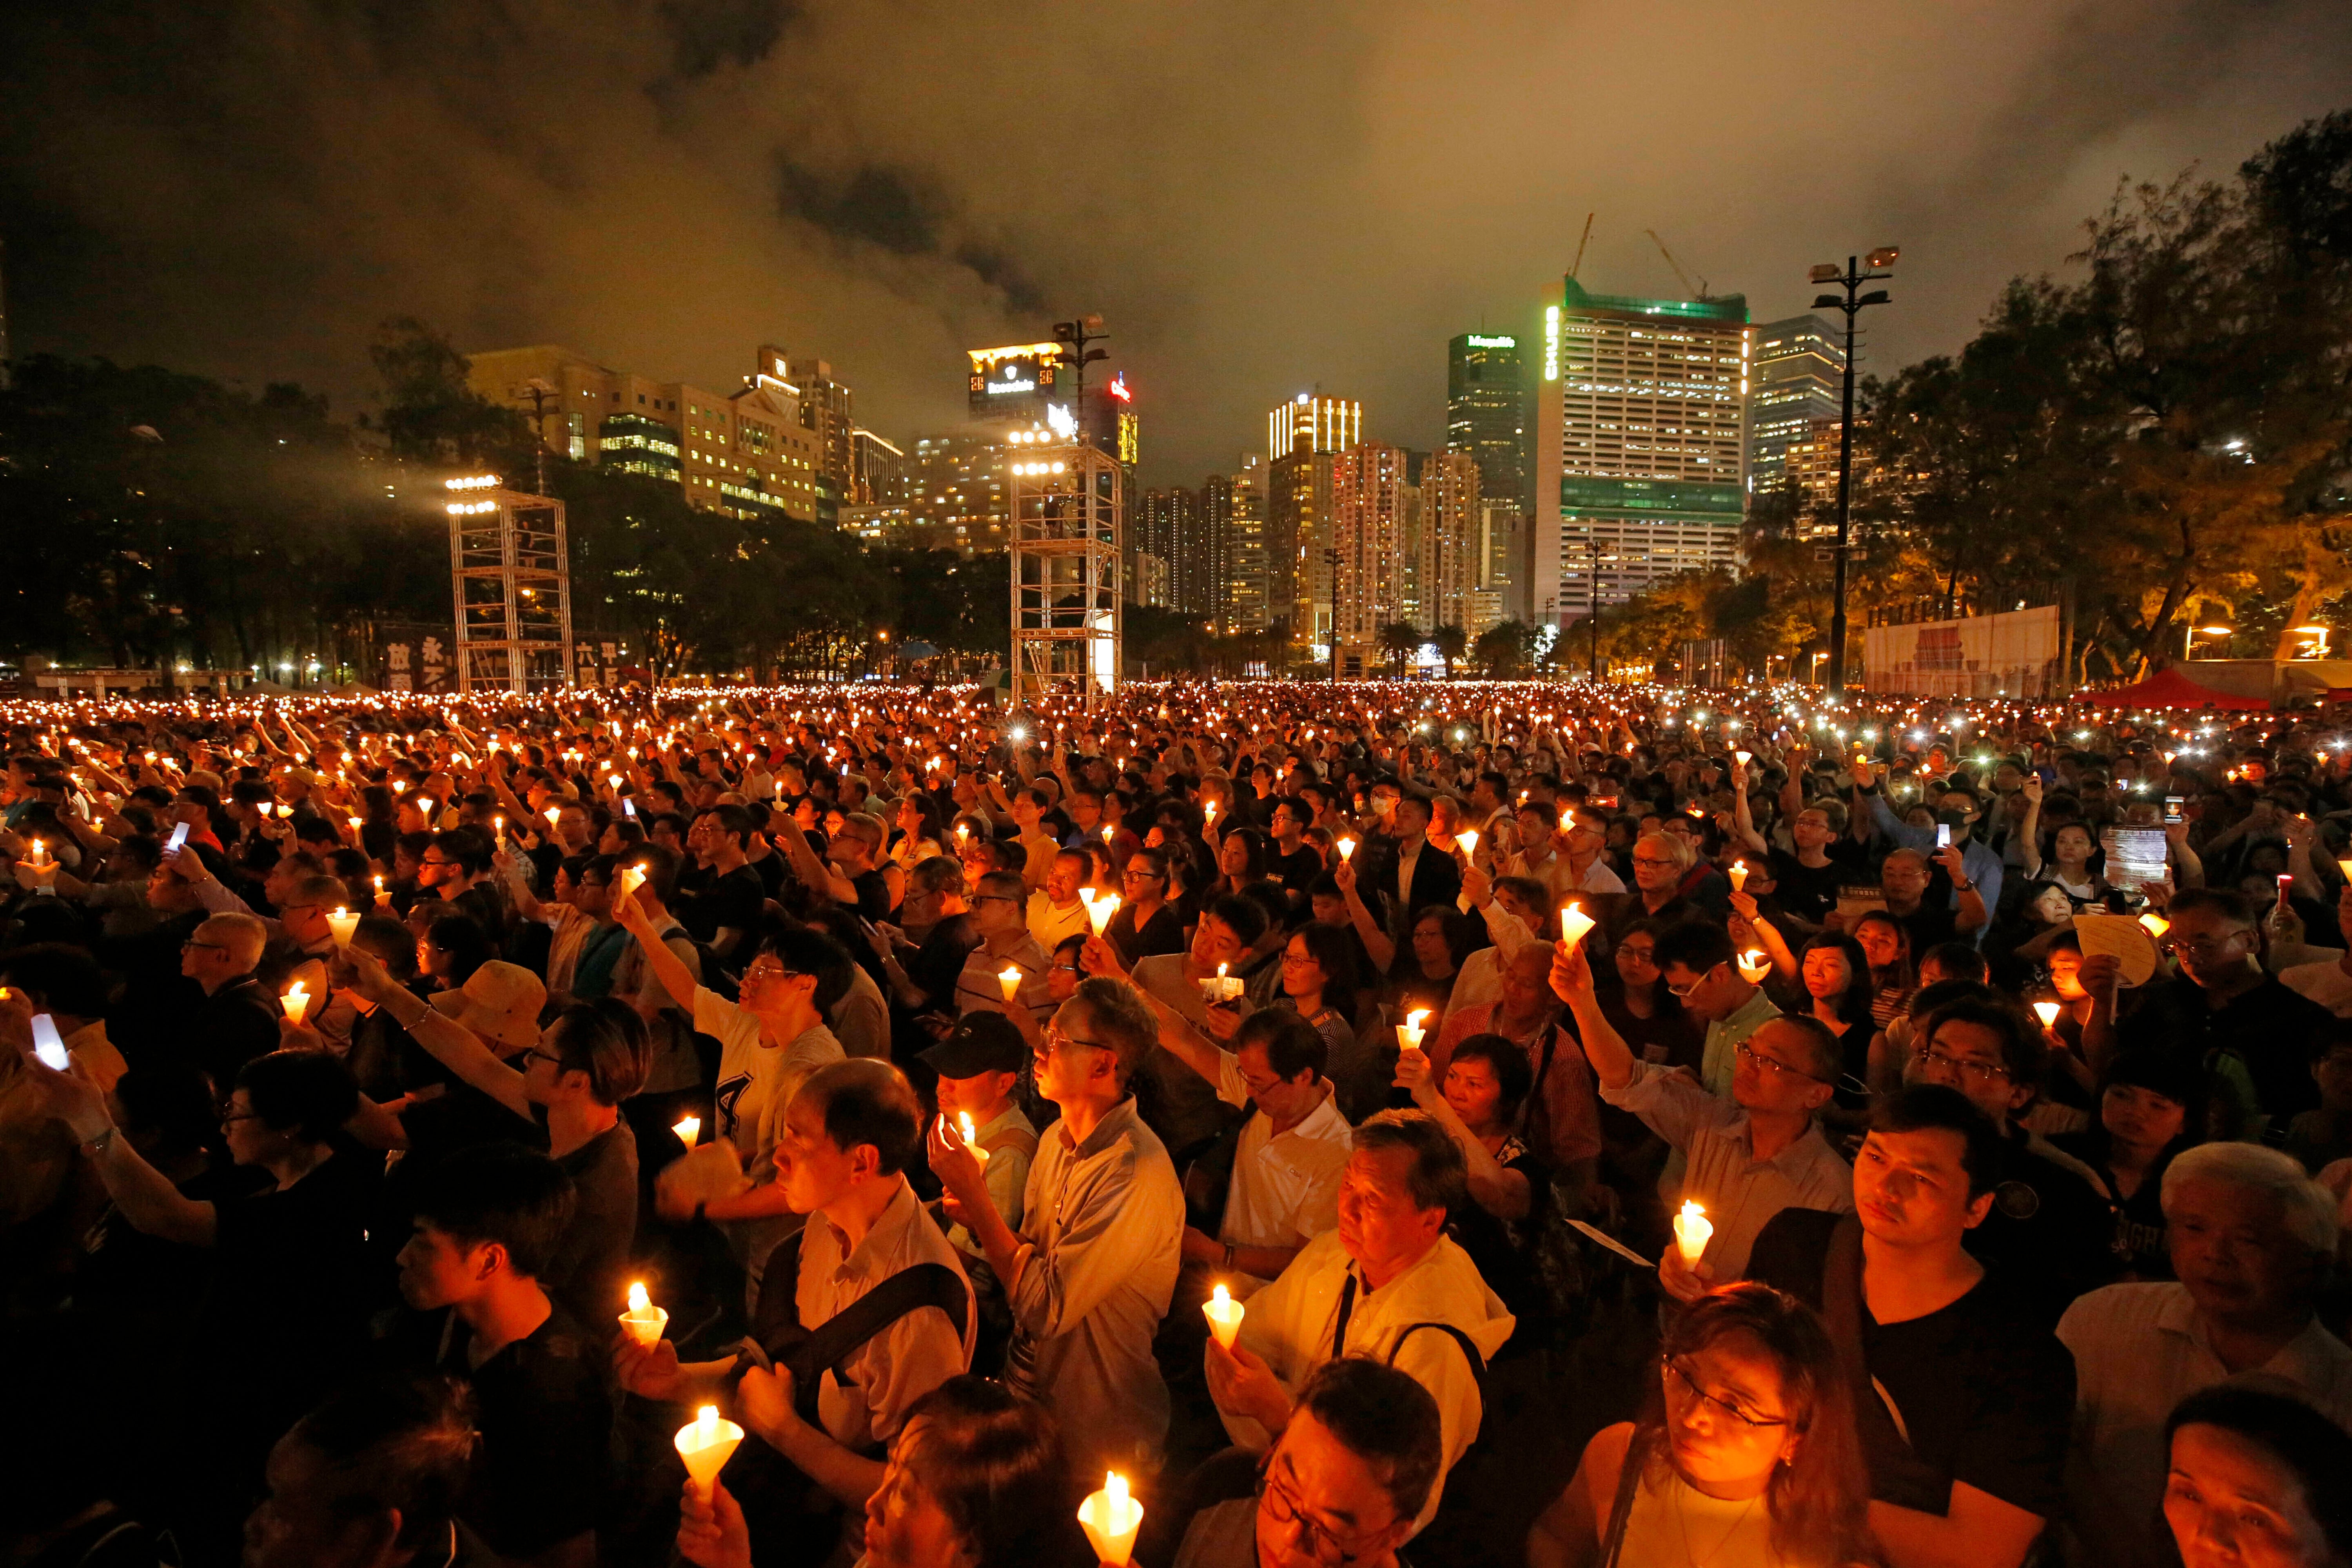 File Thousands of people attended a candlelight vigil for victims of the Chinese government’s brutal military crackdown three decades ago on protesters in Beijing’s Tiananmen Square at Victoria Park in Hong Kong in 2019